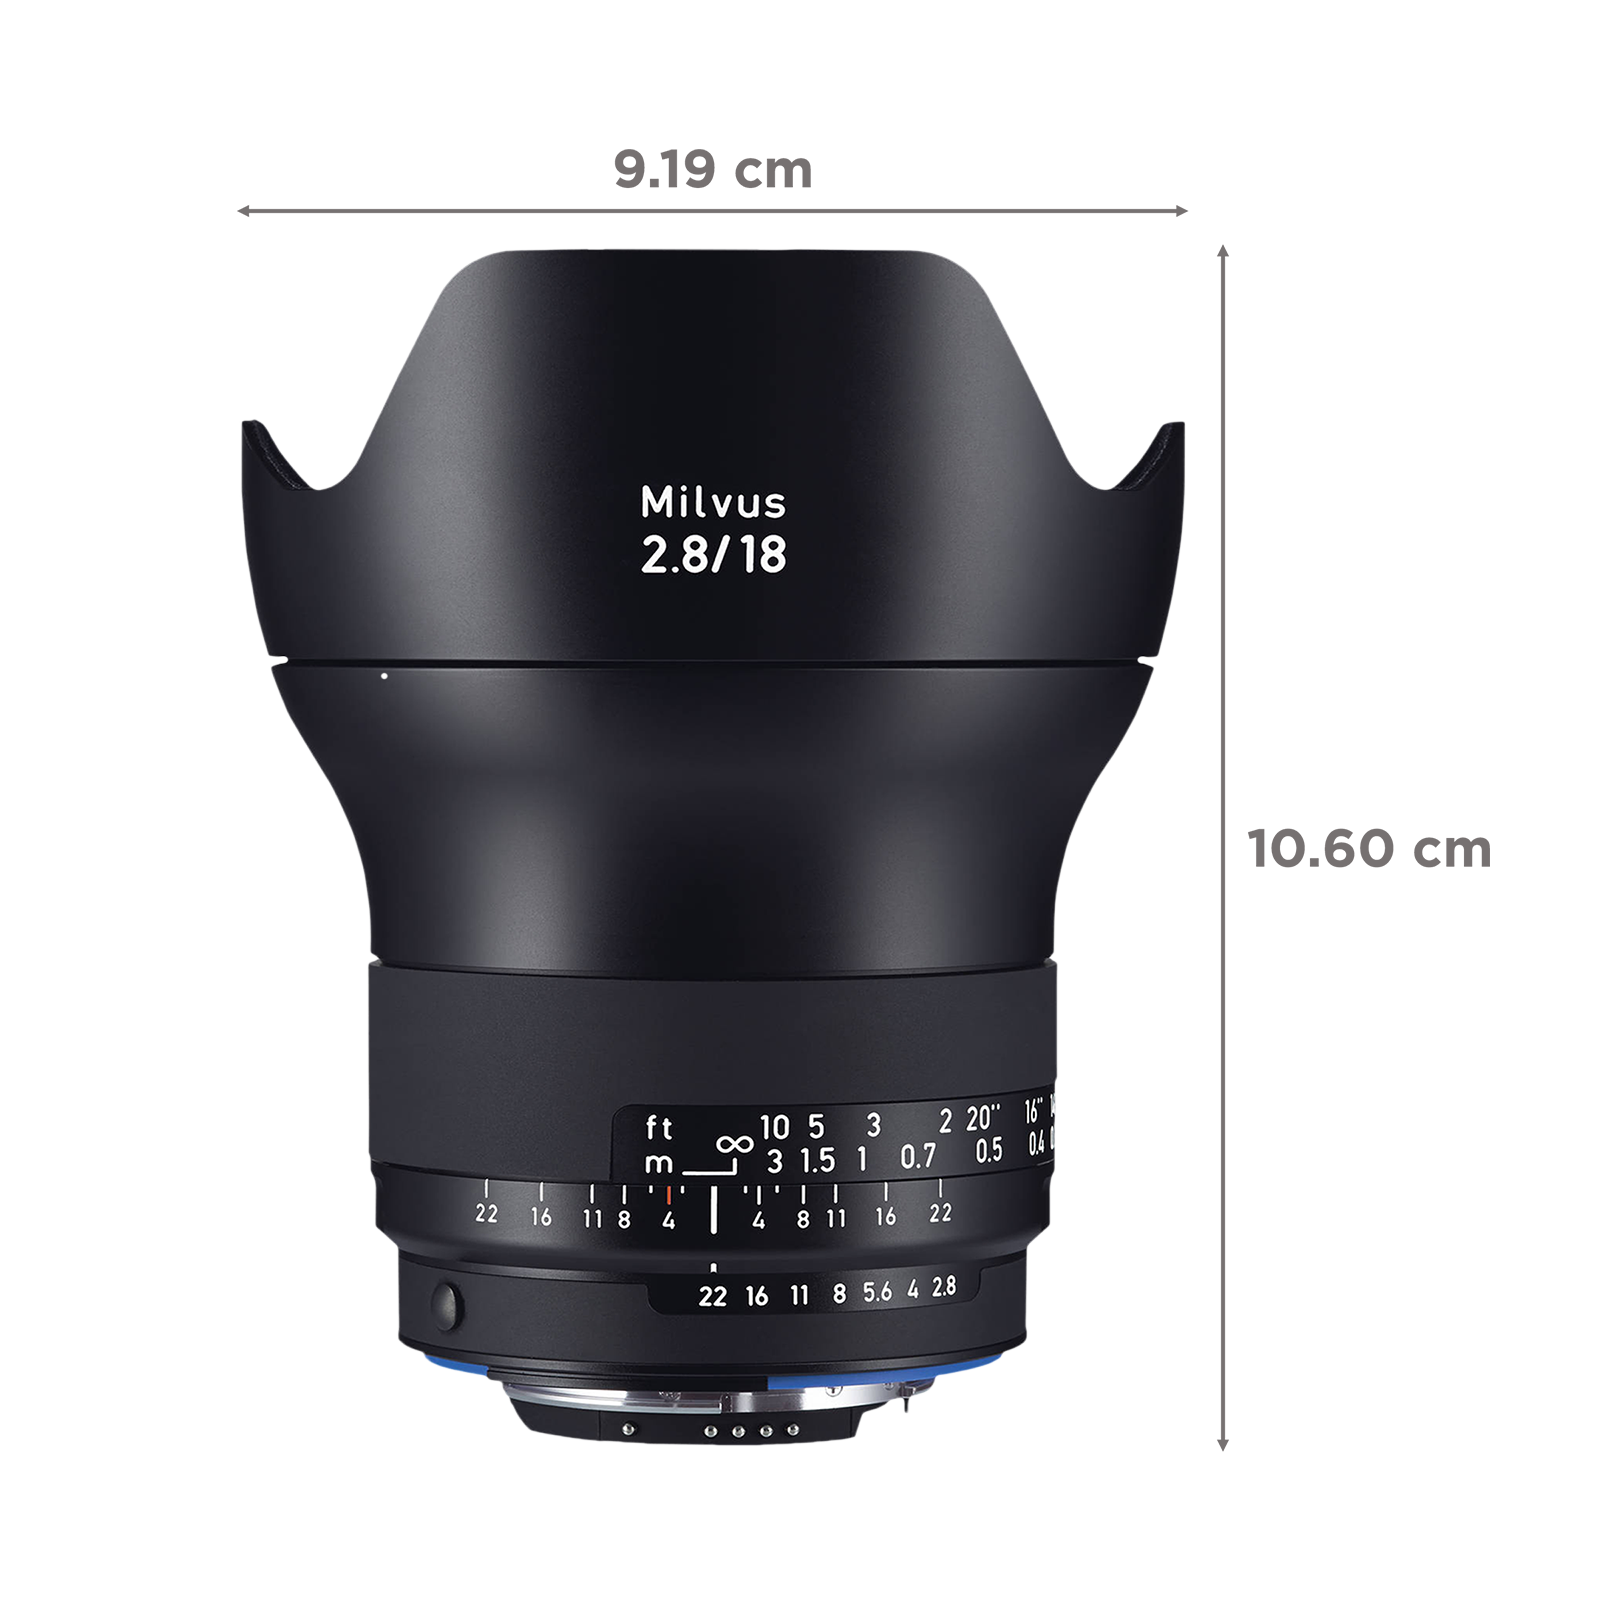 ZEISS Milvus 18mm f/2.8 - f/22 Wide-Angle Lens for Nikon F Mount ZF.2  (Protection Against Dust & Splashes)